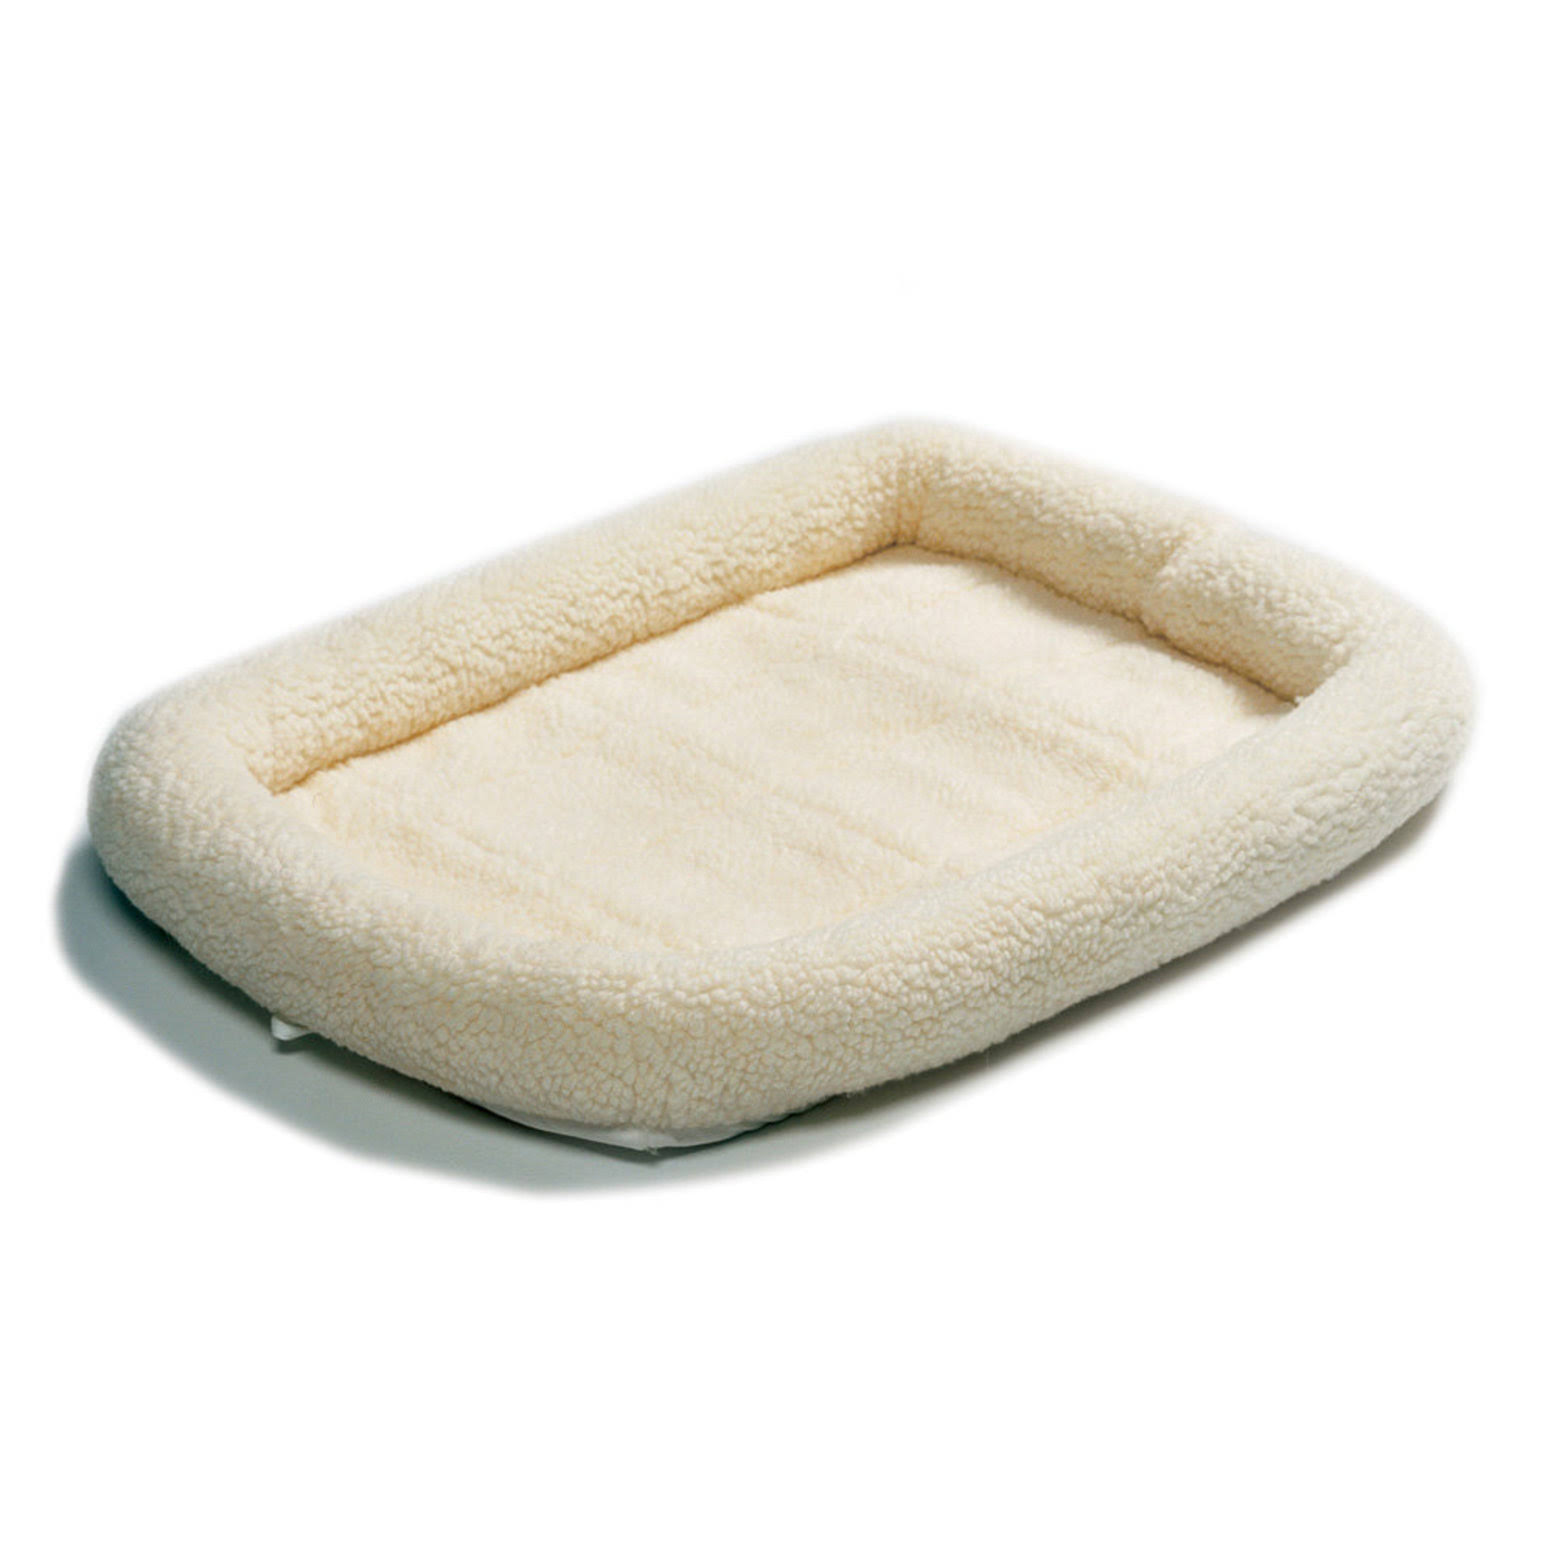 Midwest Quiet Time Bolster Pet Dog Bed - White, 42" x 26"